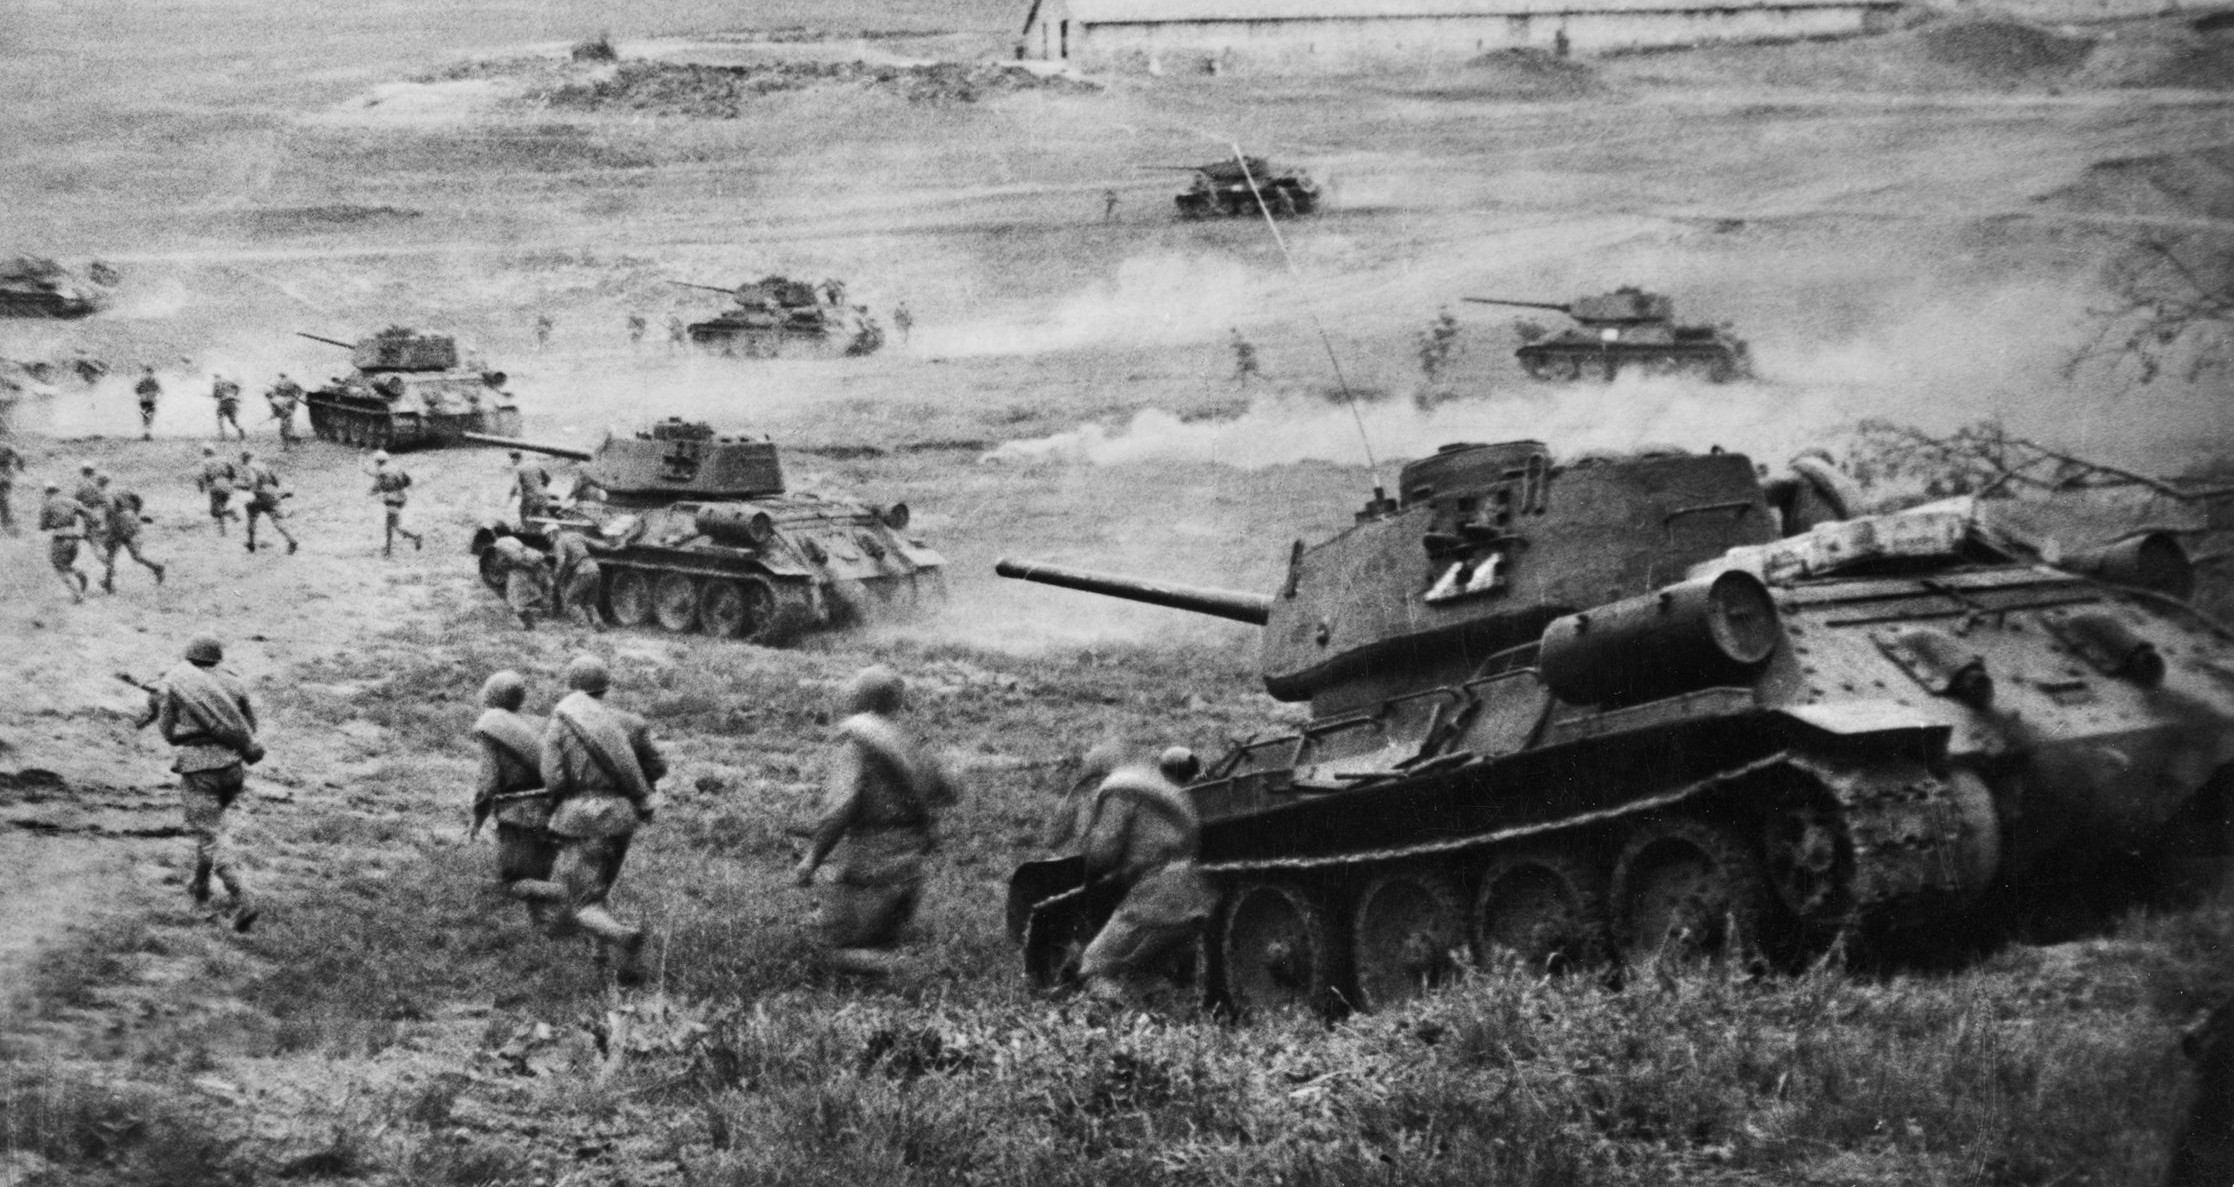 T-34 medium tanks and Red Army infantrymen attack across an open plain in the Ukraine. The T-34 proved to be one of the most outstanding armored vehicles of World War II and spearheaded the Soviet advance into the Third Reich.